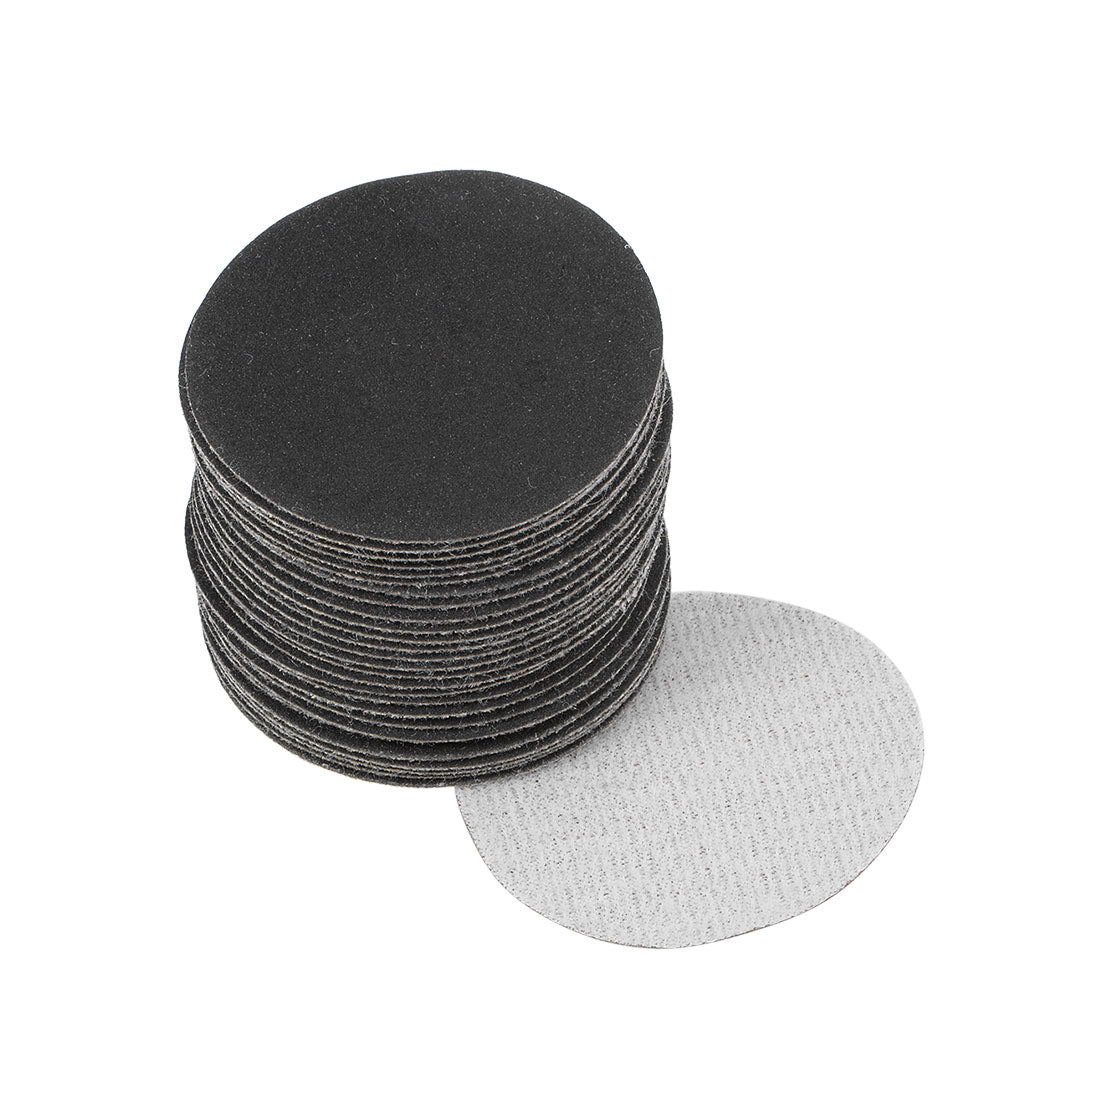 Uxcell Uxcell 2 inch Wet Dry Disc 240 Grit Hook and Loop Sanding Disc Silicon Carbide 30pcs